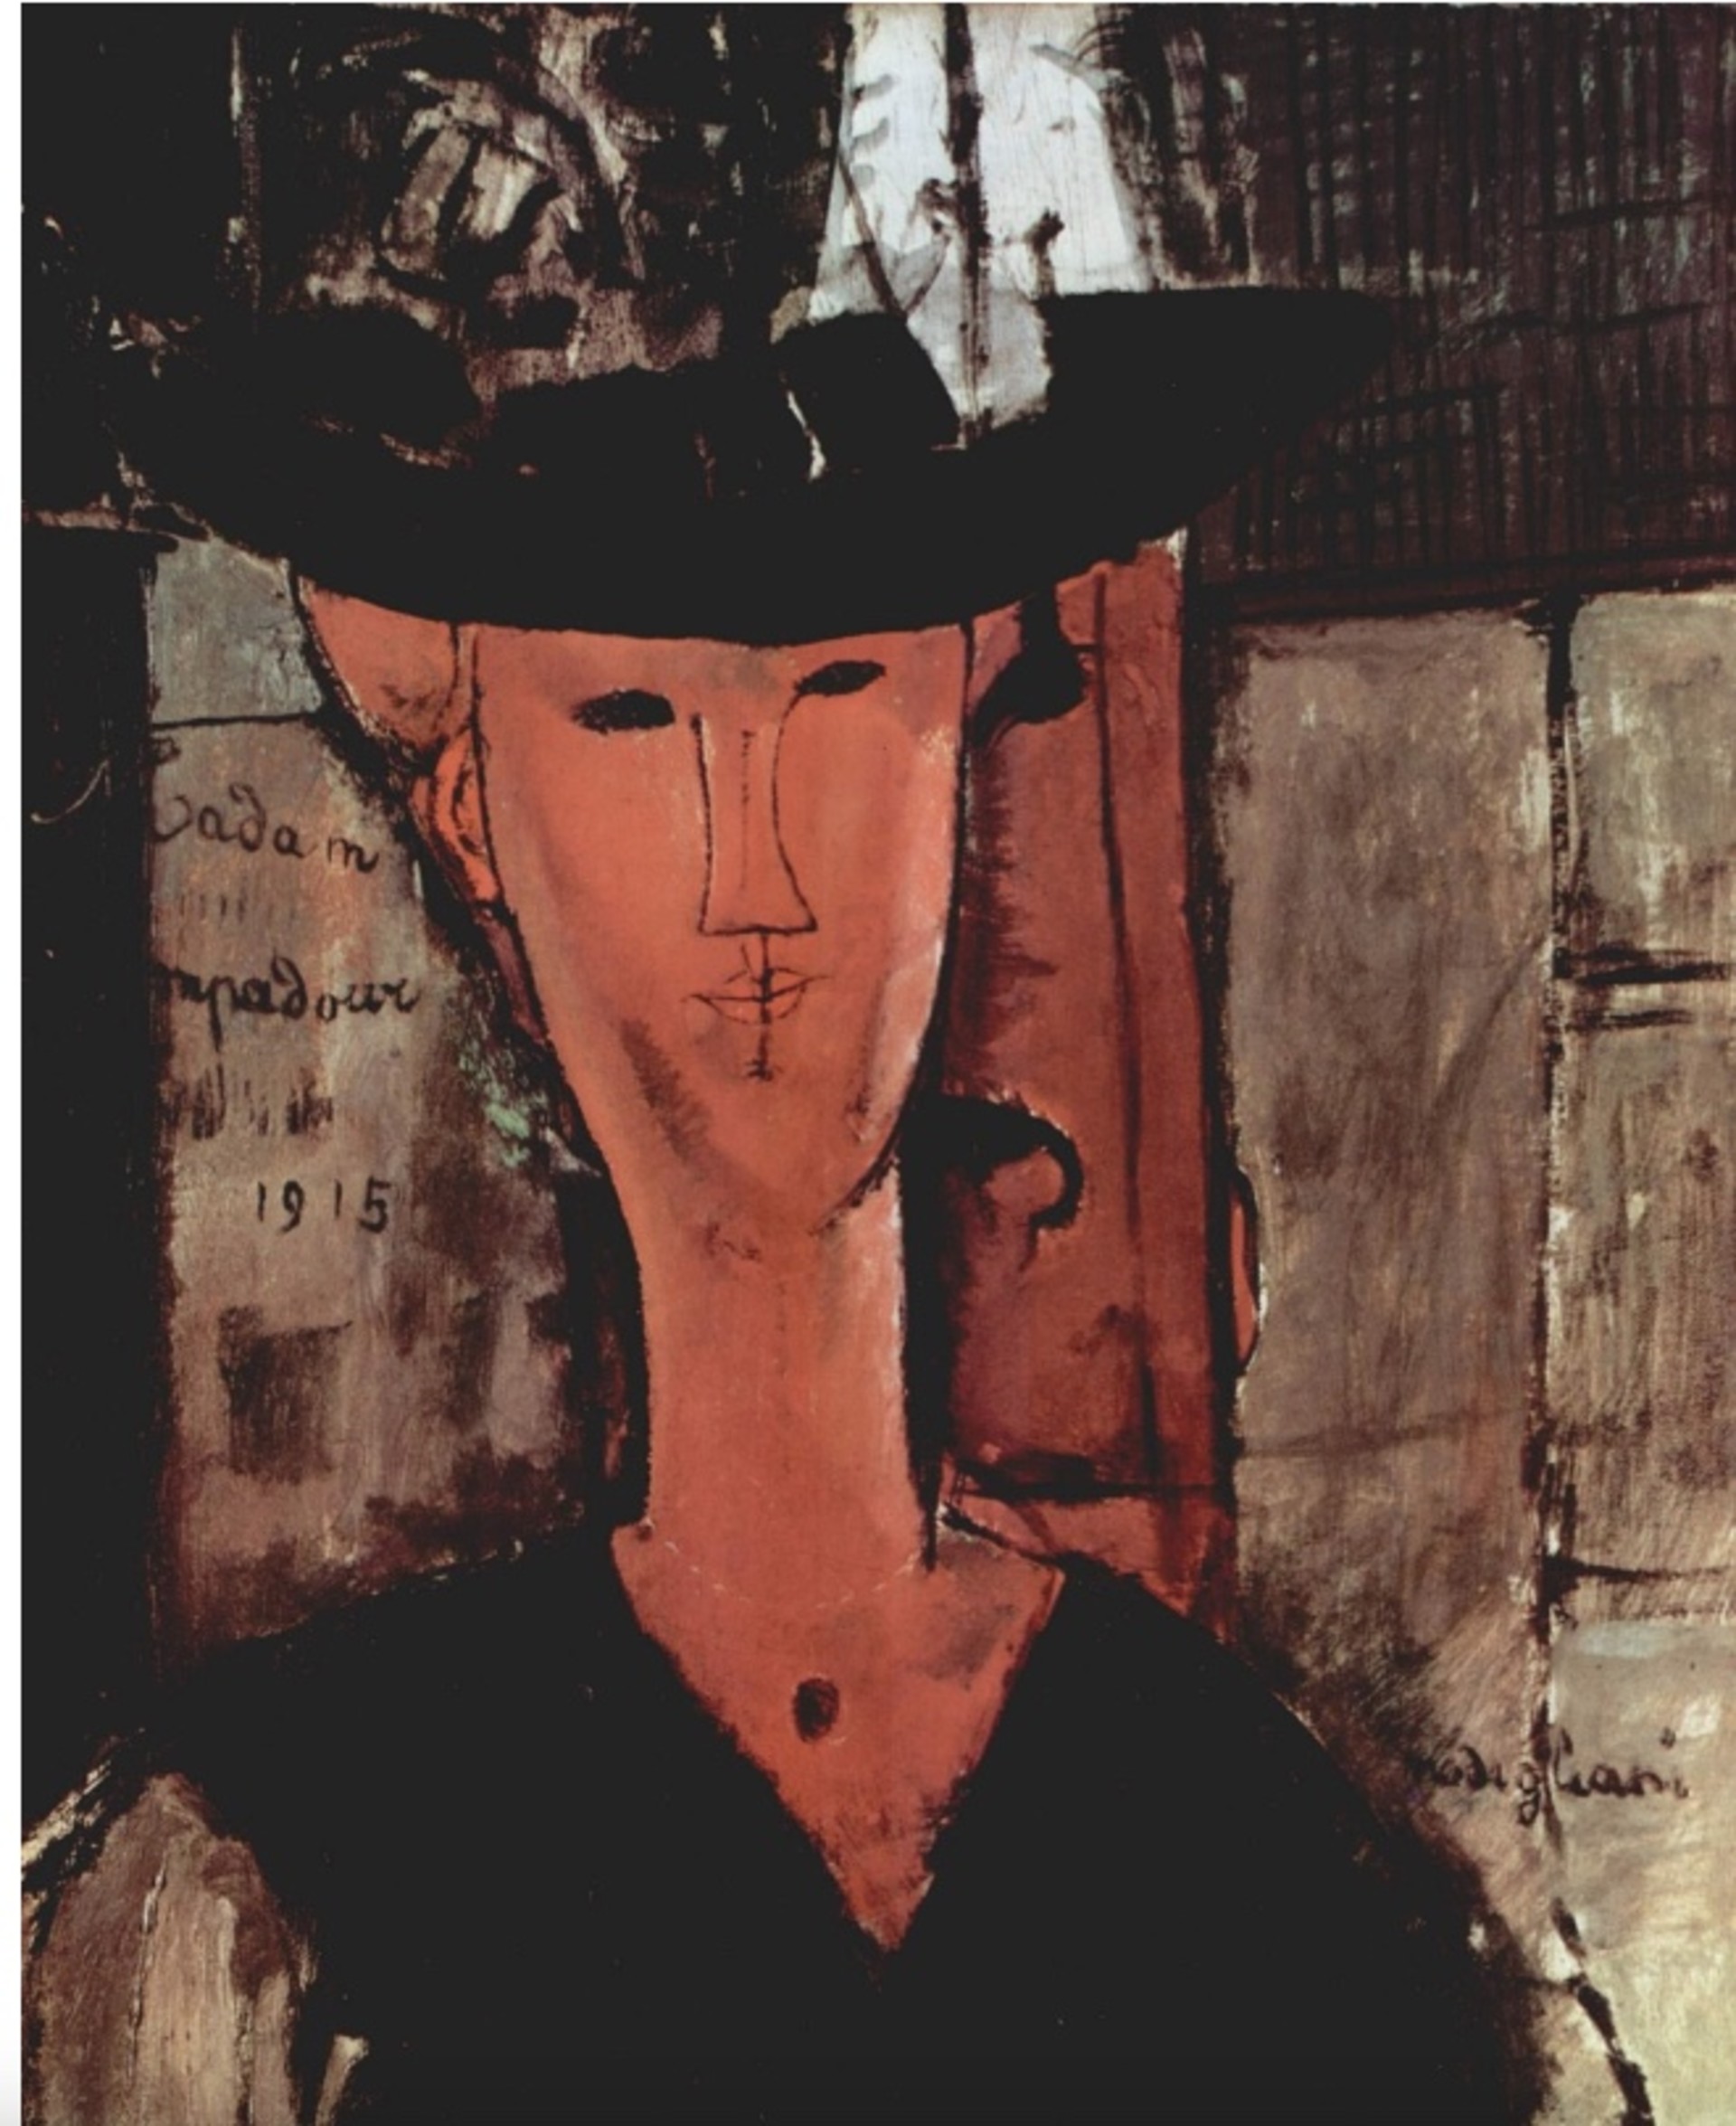 Select tickets – AMEDEO MODIGLIANI AND THE BOHEMIAN PARIS 1906 